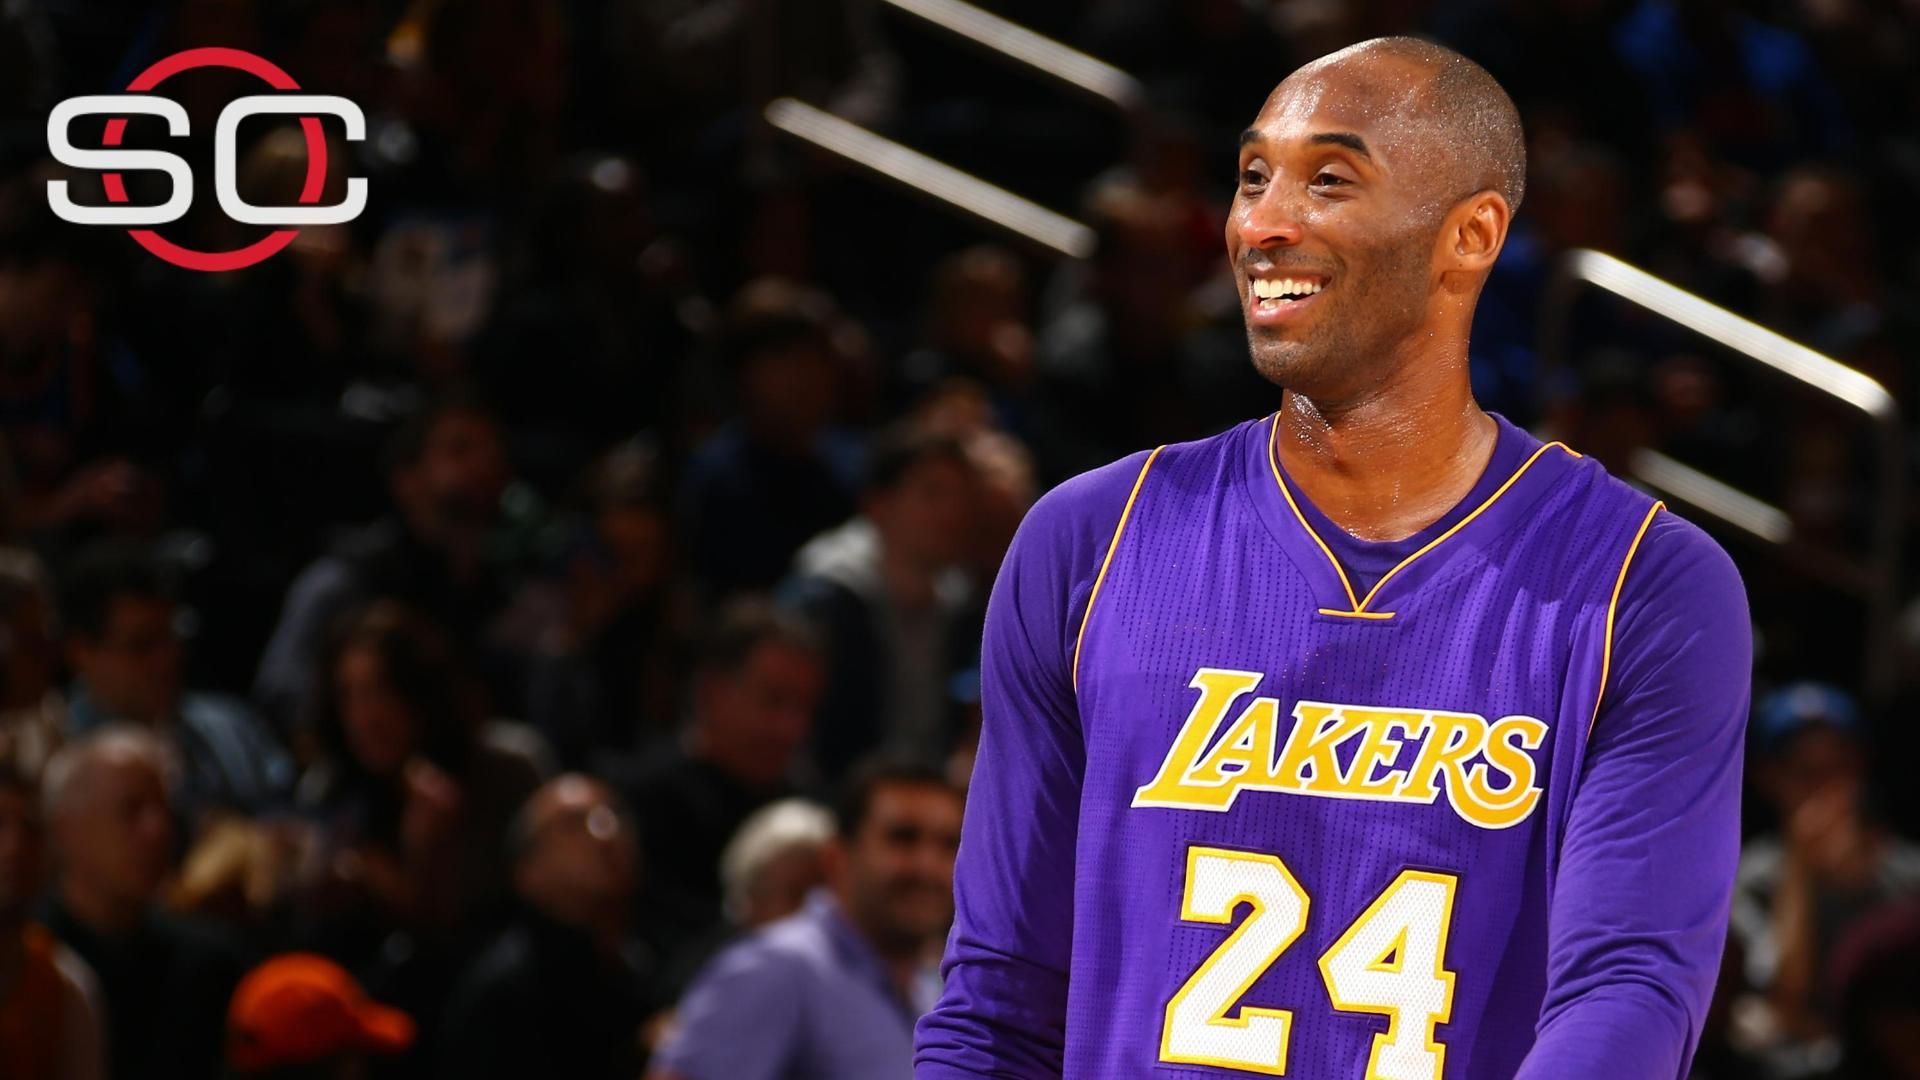 Lakers' Kobe Bryant 'at peace' after announcing retirement